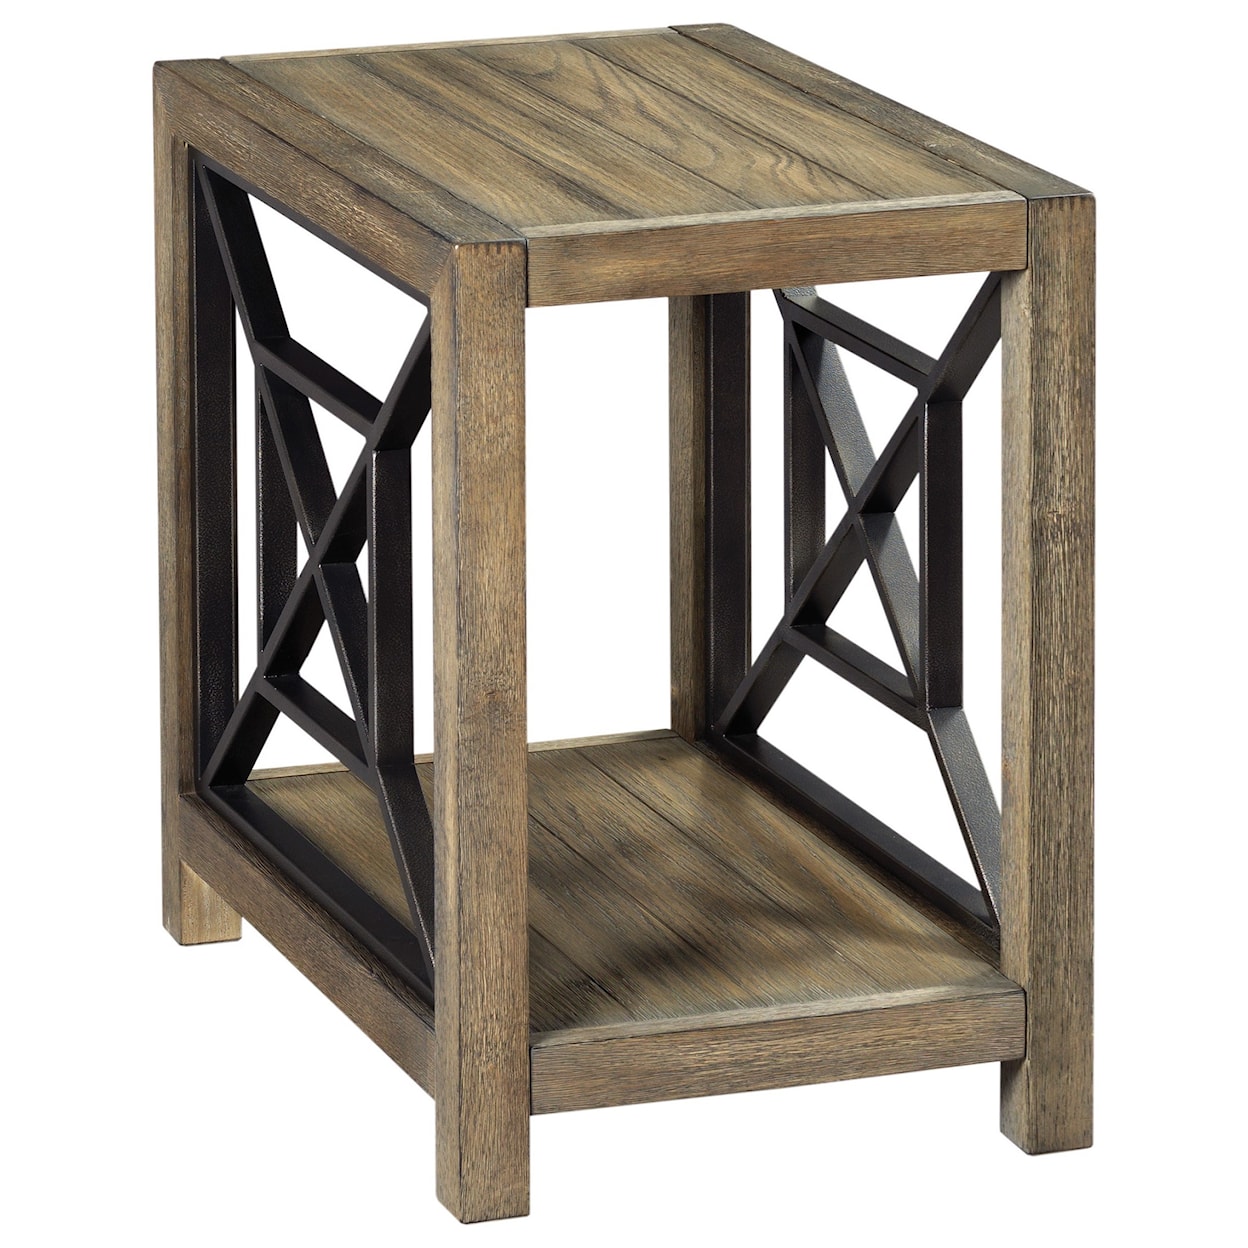 England Theory Chairside Table